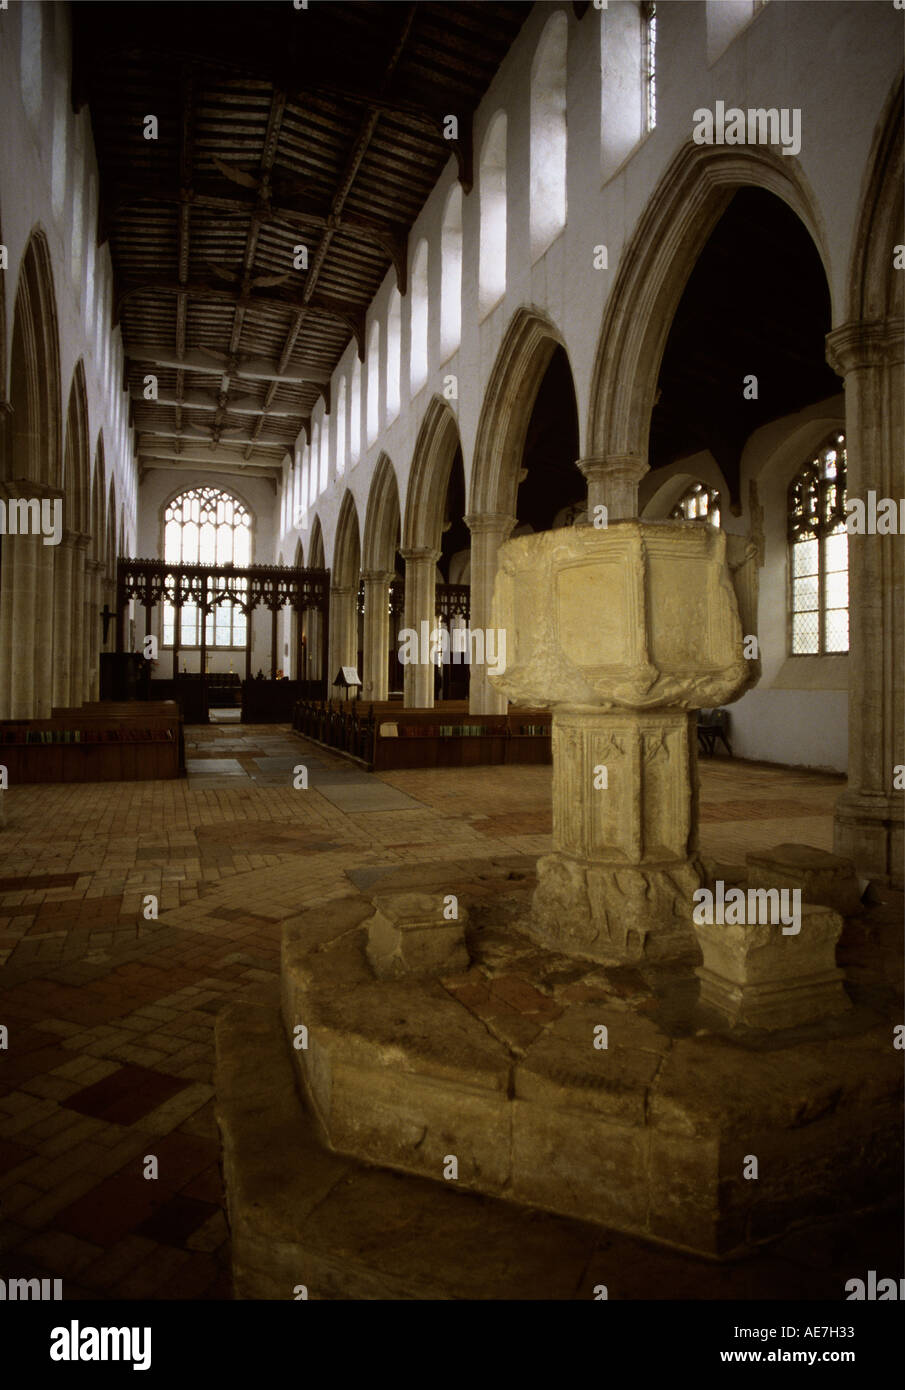 15th century Font surrounded by complex brick floor The tie Beam roof covers a nave of 127 feet Suffolk Stock Photo